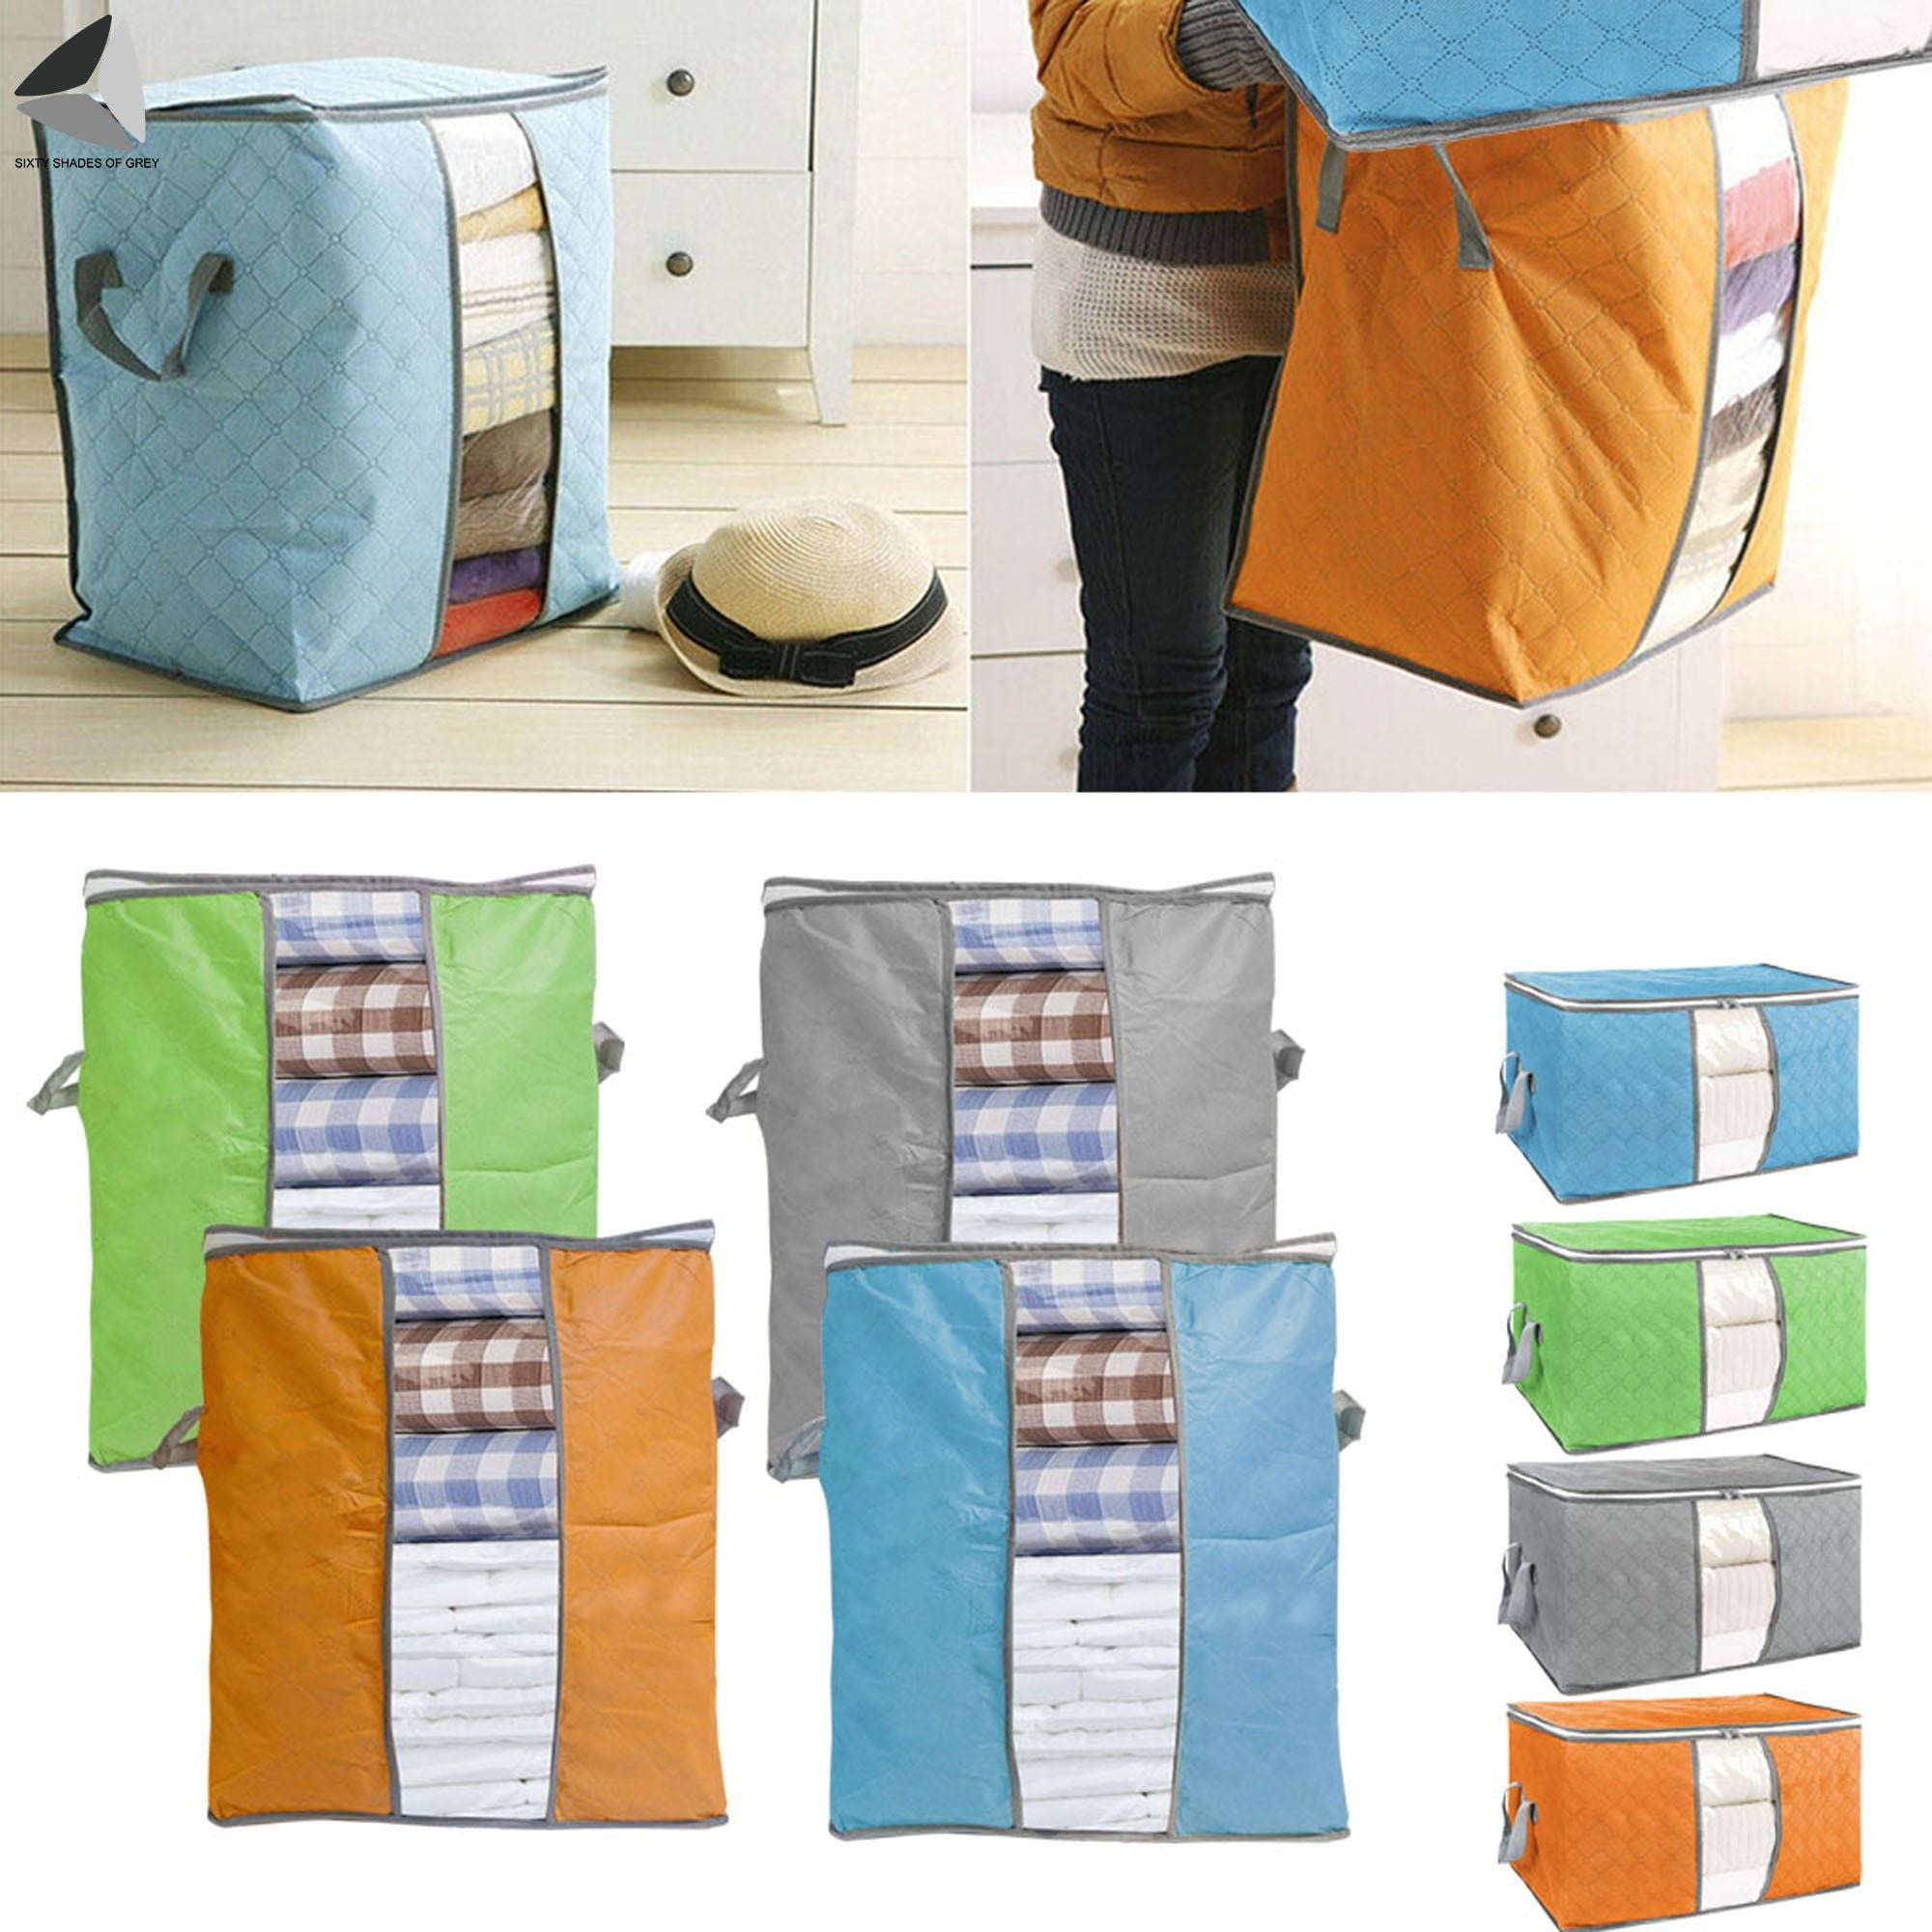 92L Storage Bag Organizer Large Capacity for Clothes Comforters Blankets Bedding